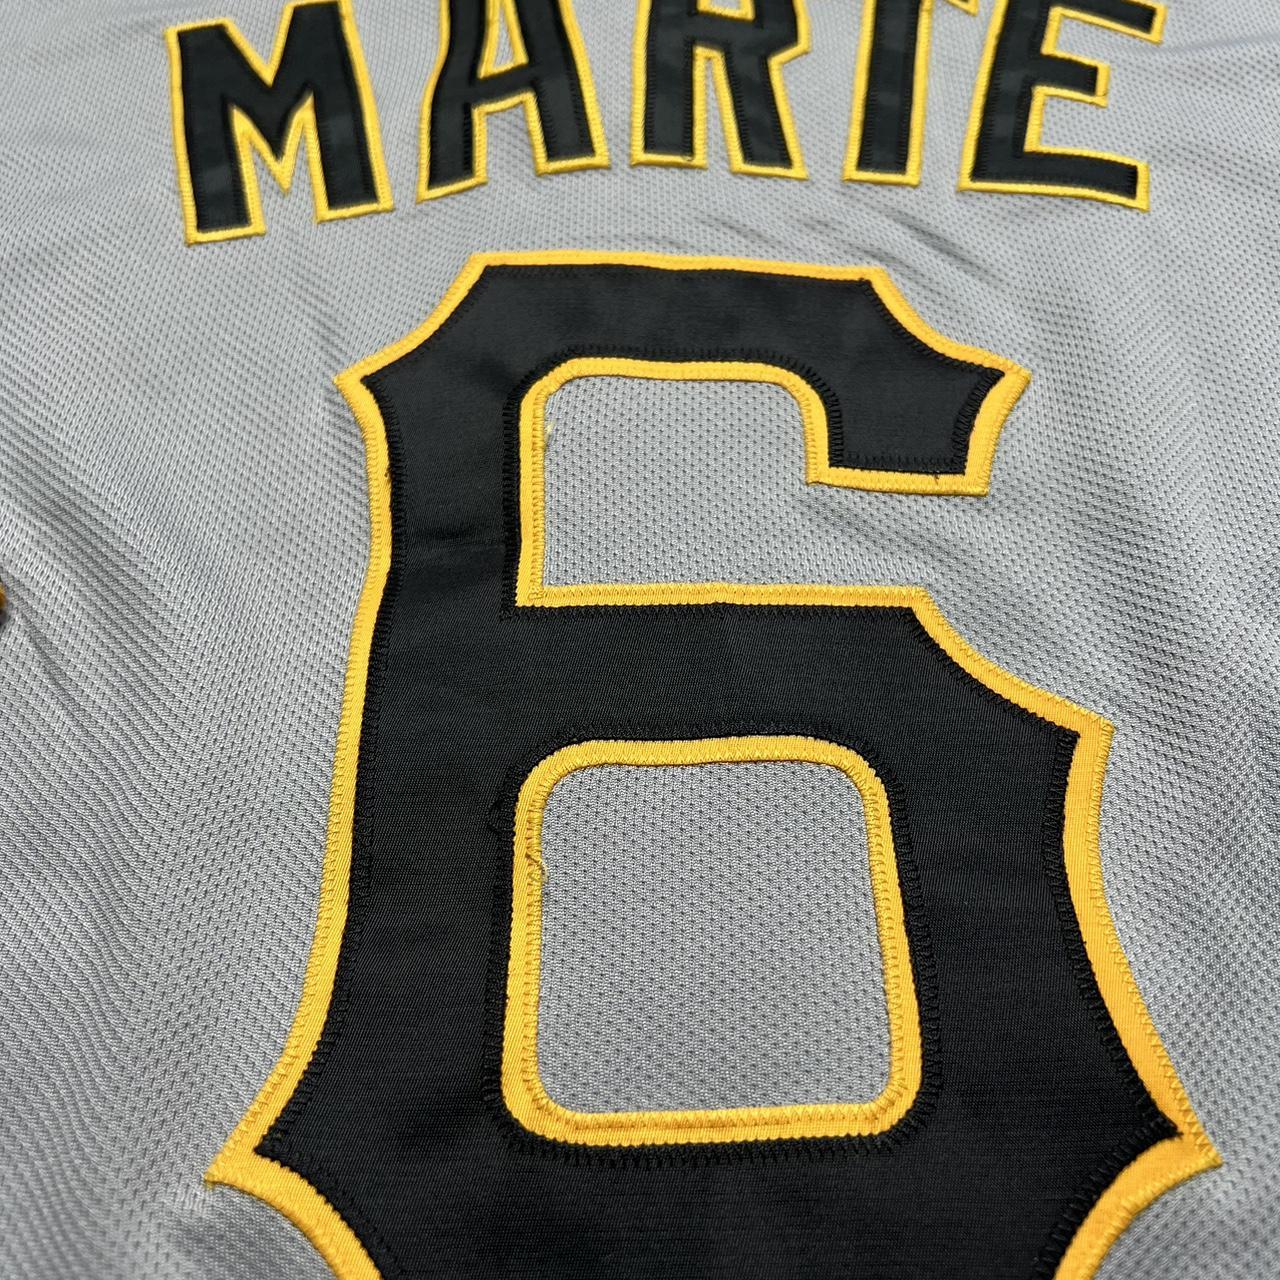 Pittsburgh Pirates Starling Marte Jersey Authentic - Depop